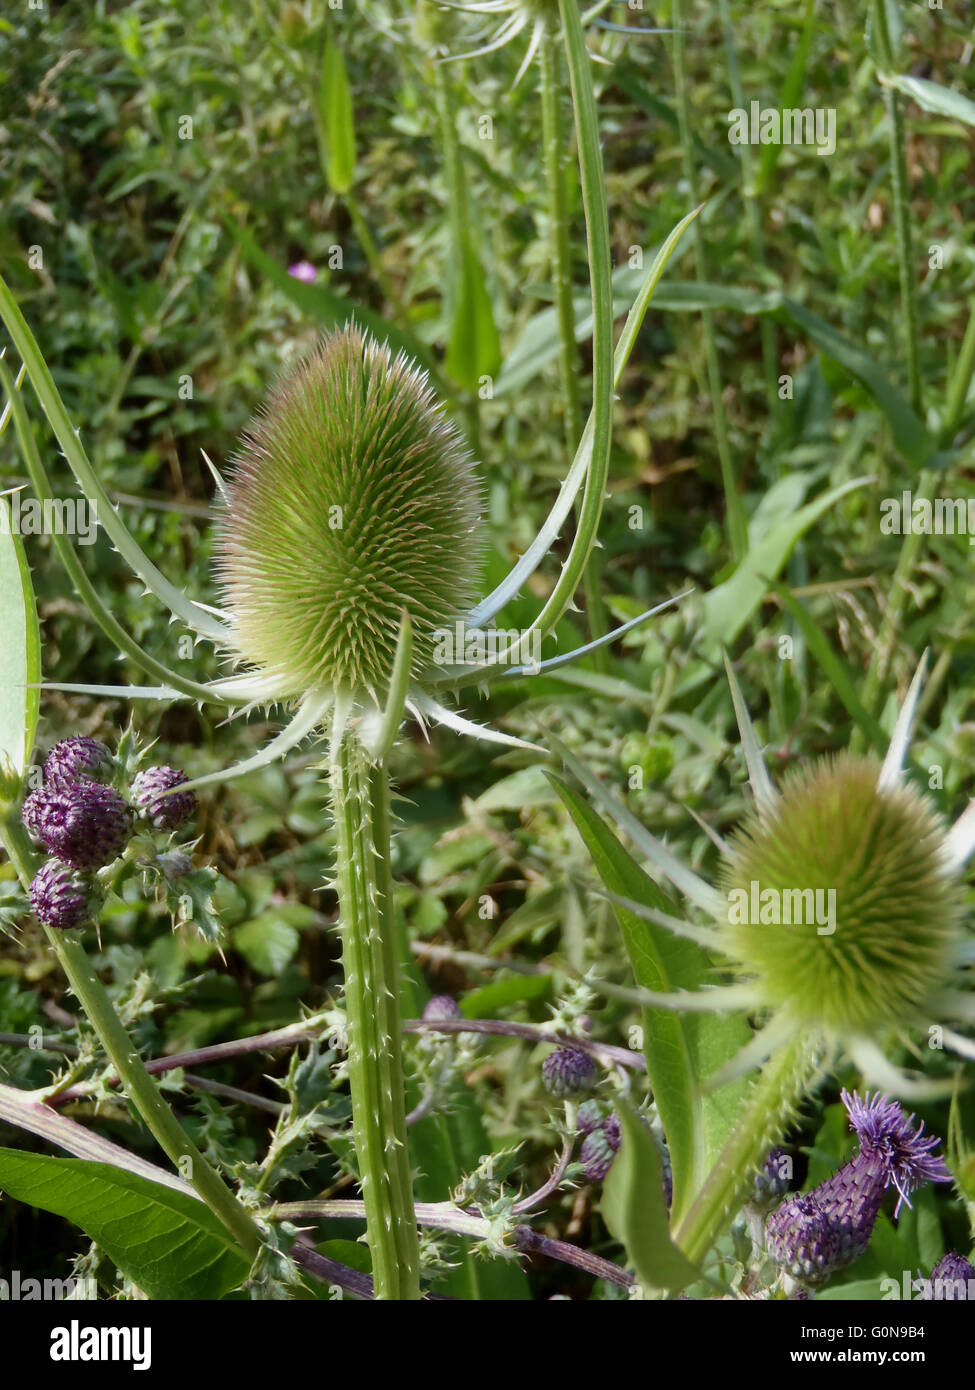 Wild teasel (Dipsacus fullonum) heads among teasels and thistles Stock Photo